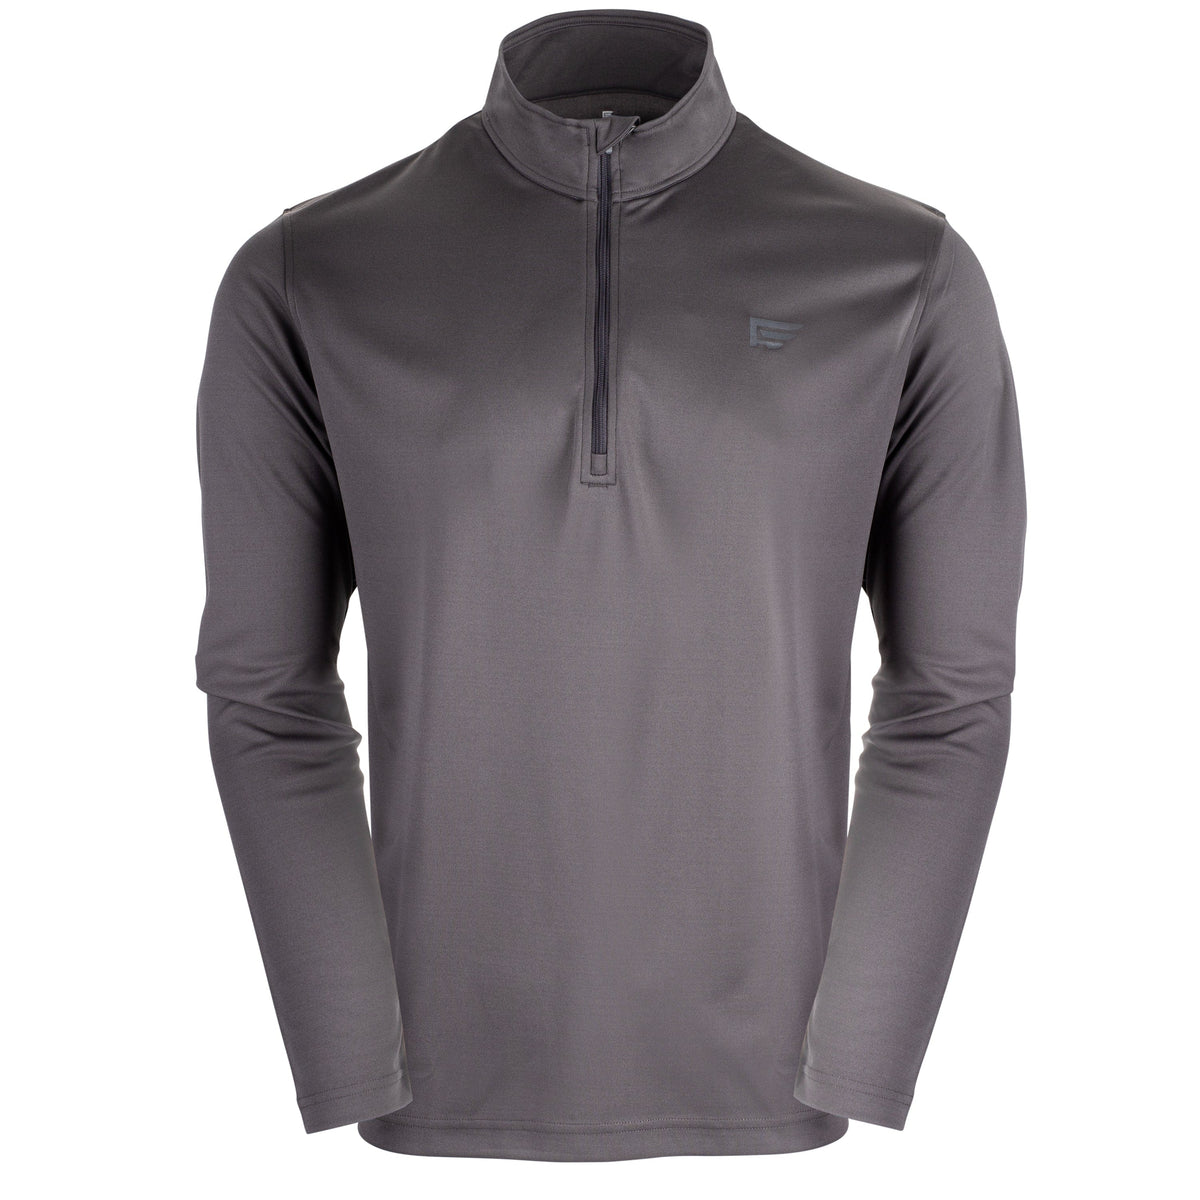 Founders Club Performance Men&#39;s Long Sleeve Lightweight Breathable Thermal Half Zip Baselayer Shirt Top Golf Hiking Skiing Gray